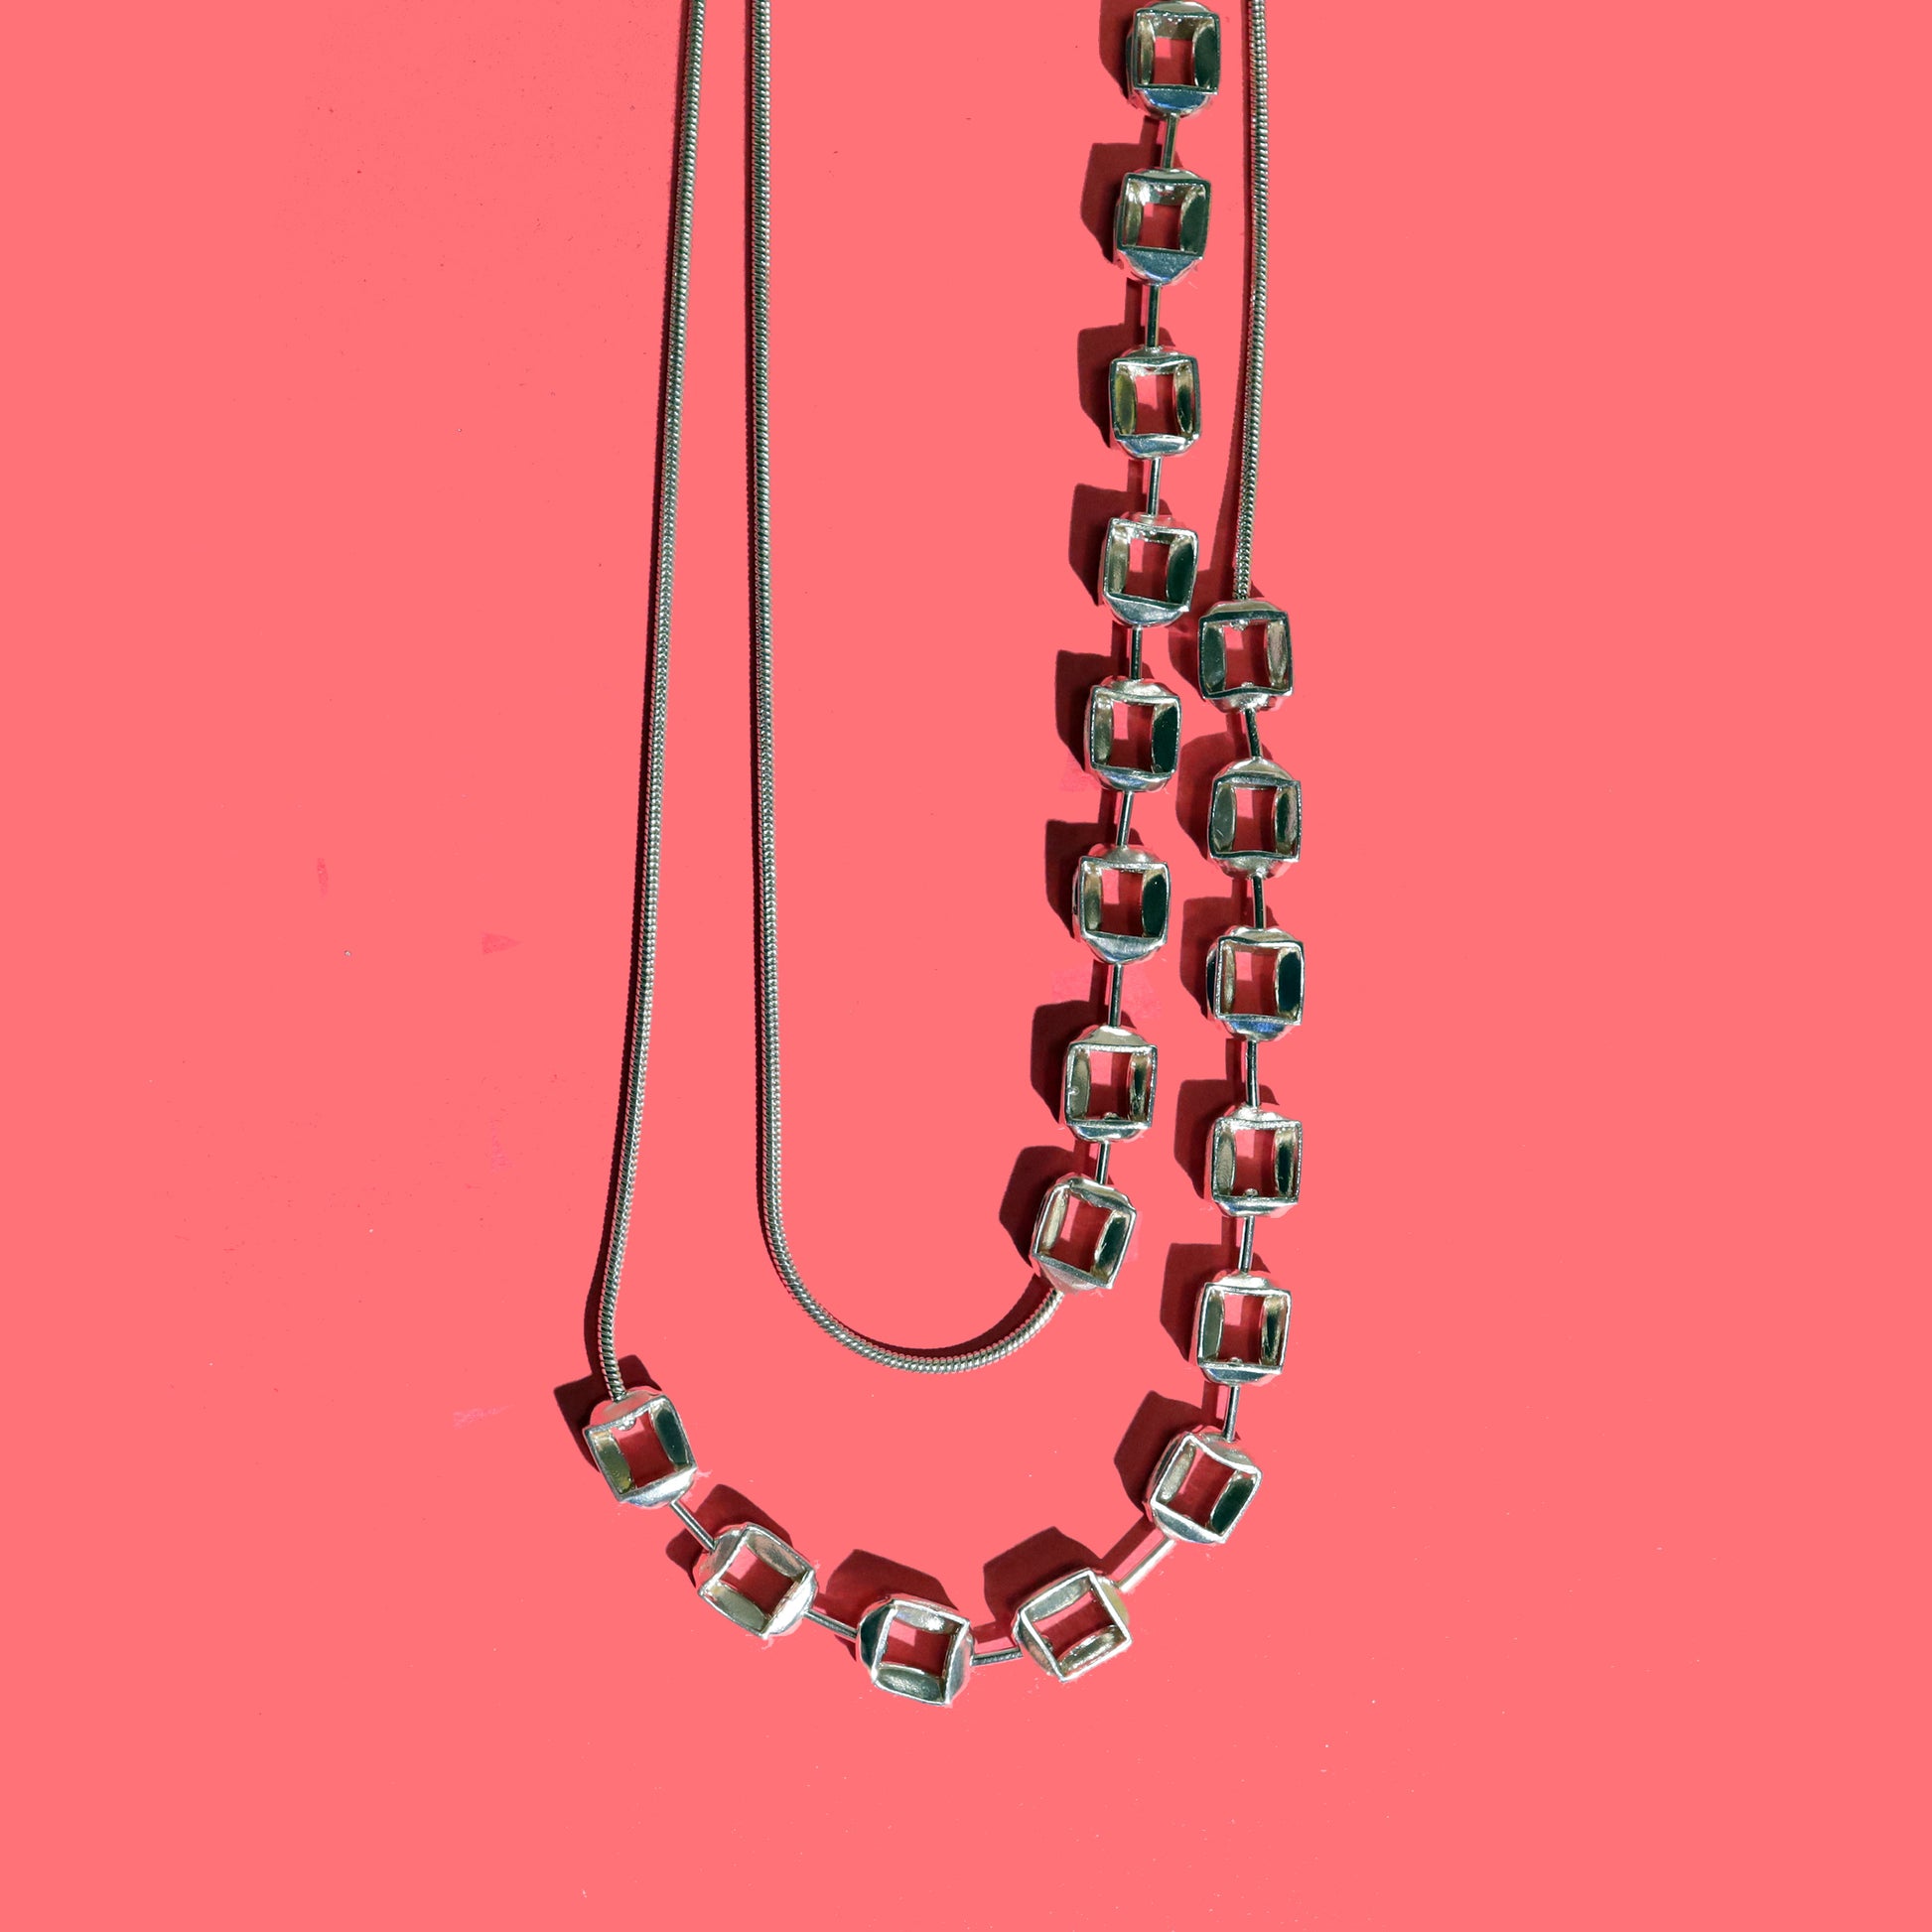 Sterling silver BASO chain necklace by Kim Paquet